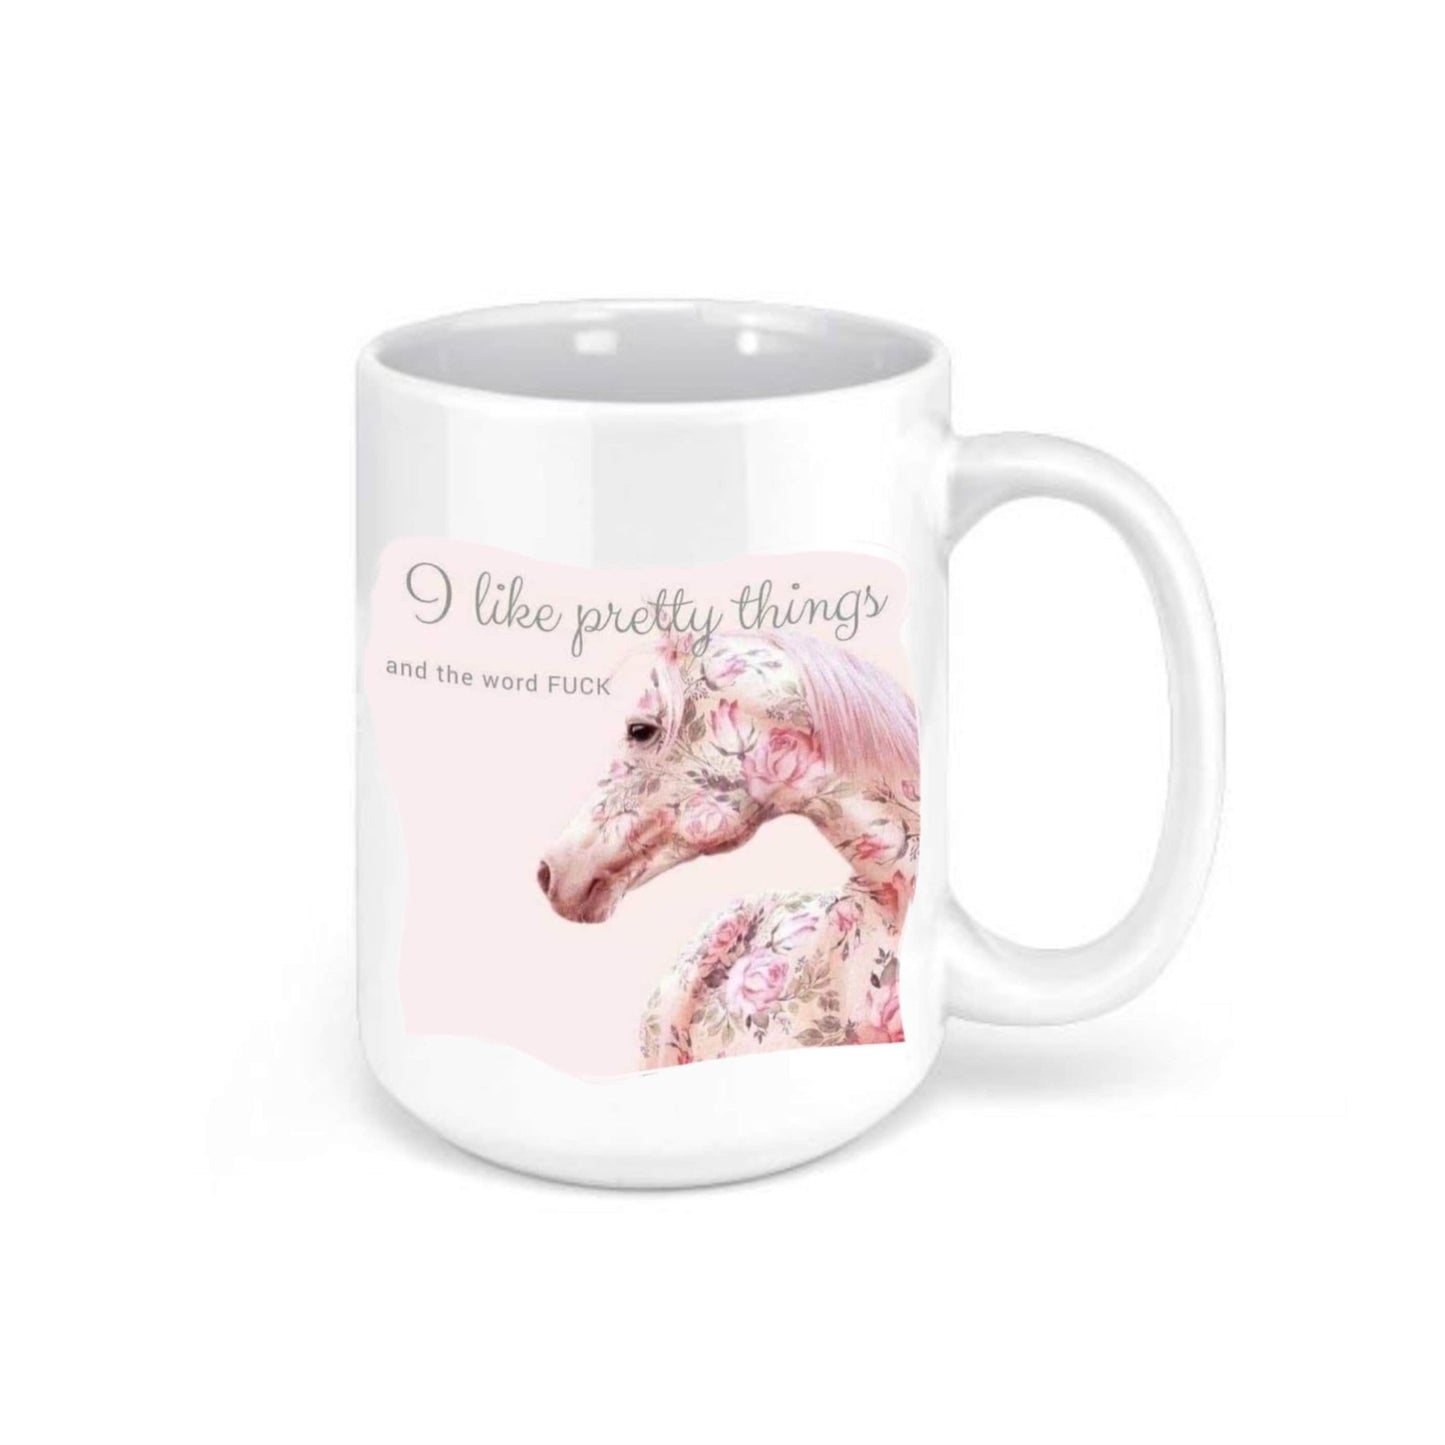 I like pretty things and the word fuck Mug Snarky Cup Strong Women Glass Ceiling Breakers Unicorn Feminist Humor gift for her bestie boss - SBS T Shop